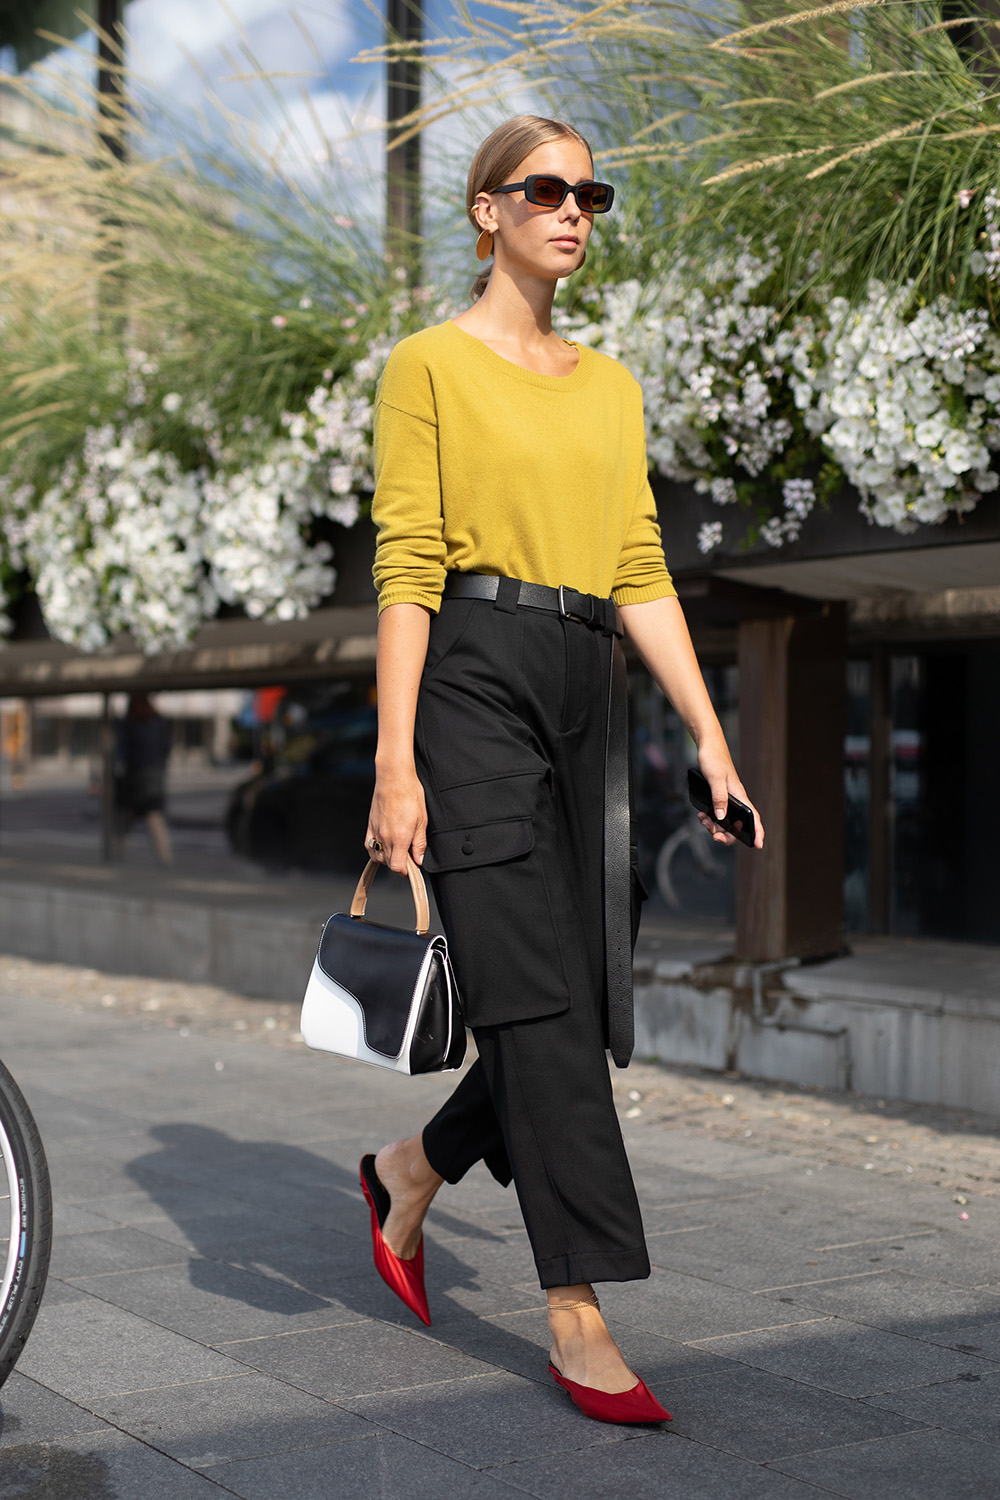 Precious Cargo: The practical pant trend that’s replacing your mom jeans (and fast) |STOCKHOLM, SWEDEN - AUGUST 28: A guest is seen on the street during Fashion Week Stockholm wearing a yellow sweater with black cargo pants and red heels on August 28, 2018 in Stockholm, Sweden. (Photo by Matthew Sperzel/Getty Images)